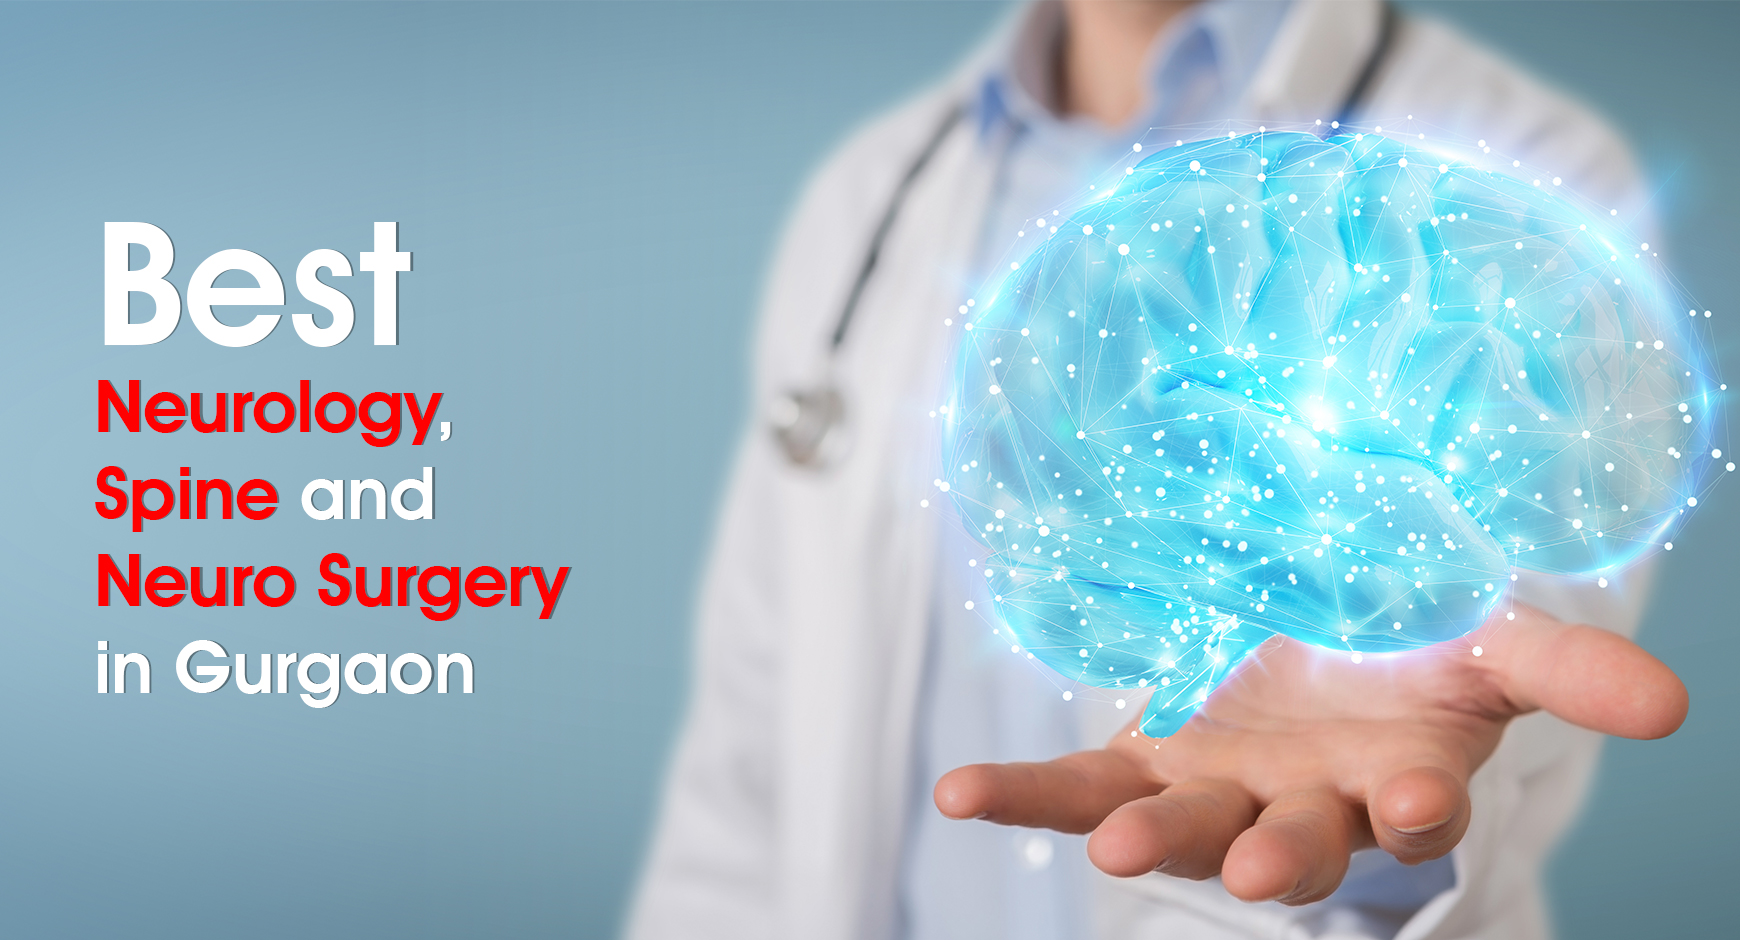 Best neurology, spine and neuro surgery in Gurgaon- Signature Hospital